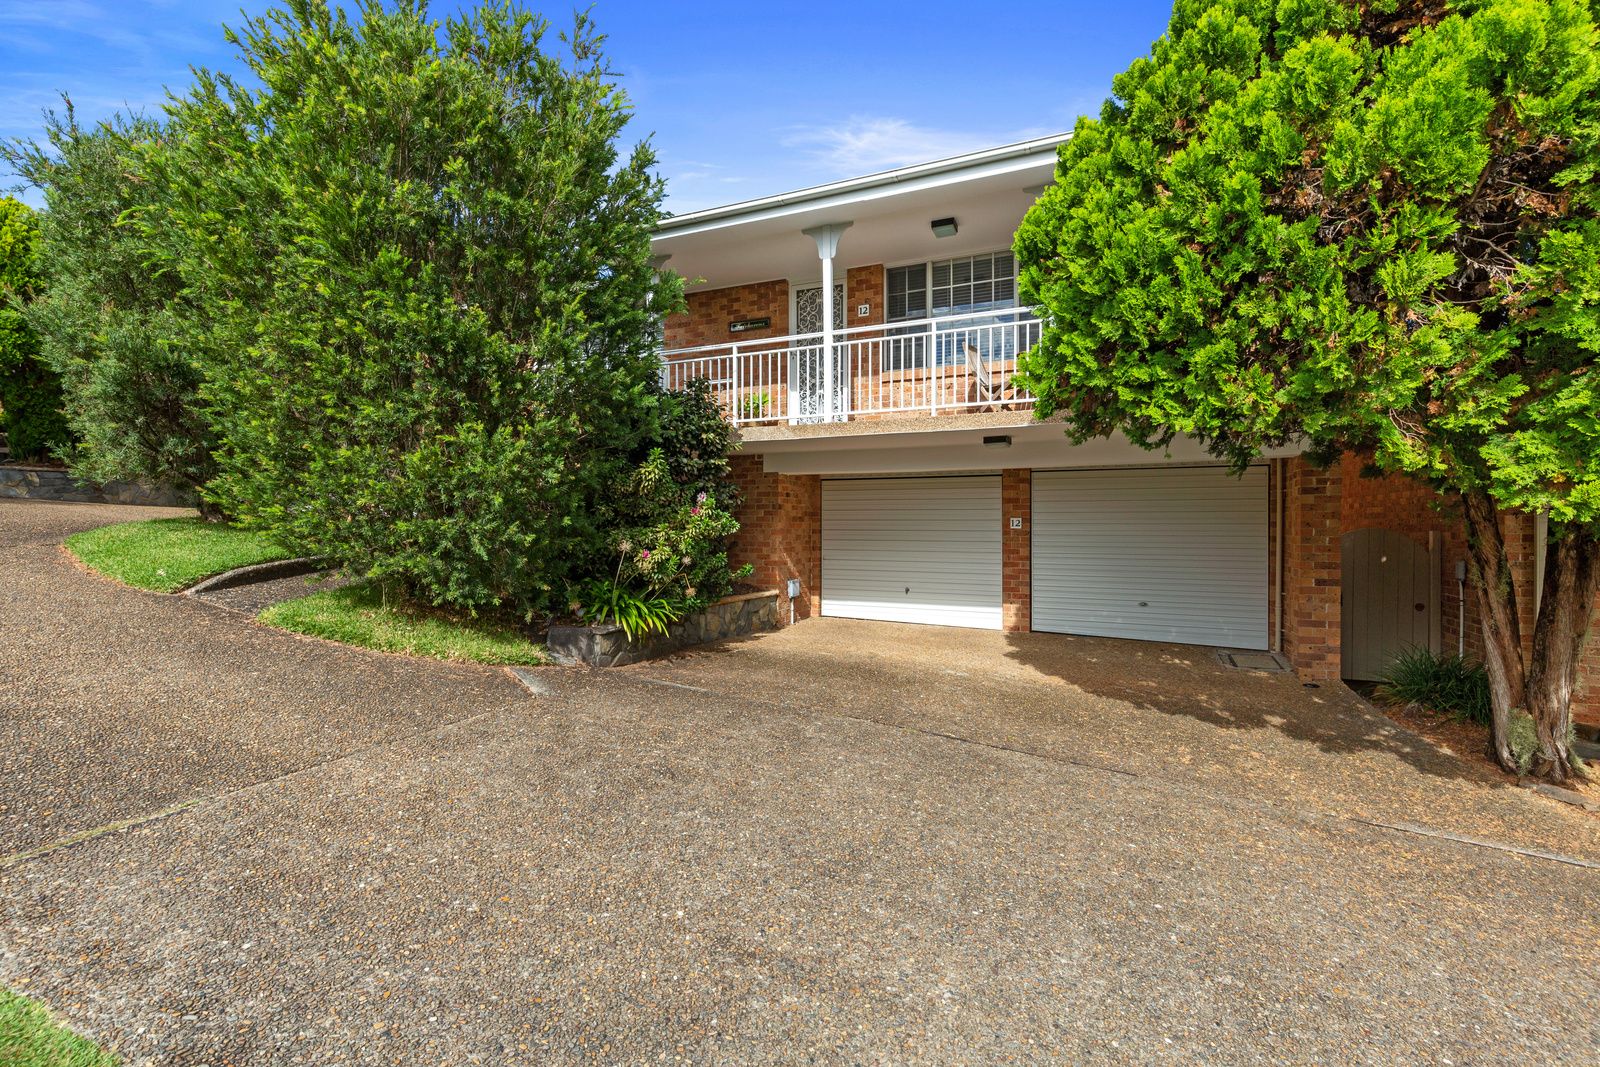 12/12 Homedale Crescent, Connells Point NSW 2221